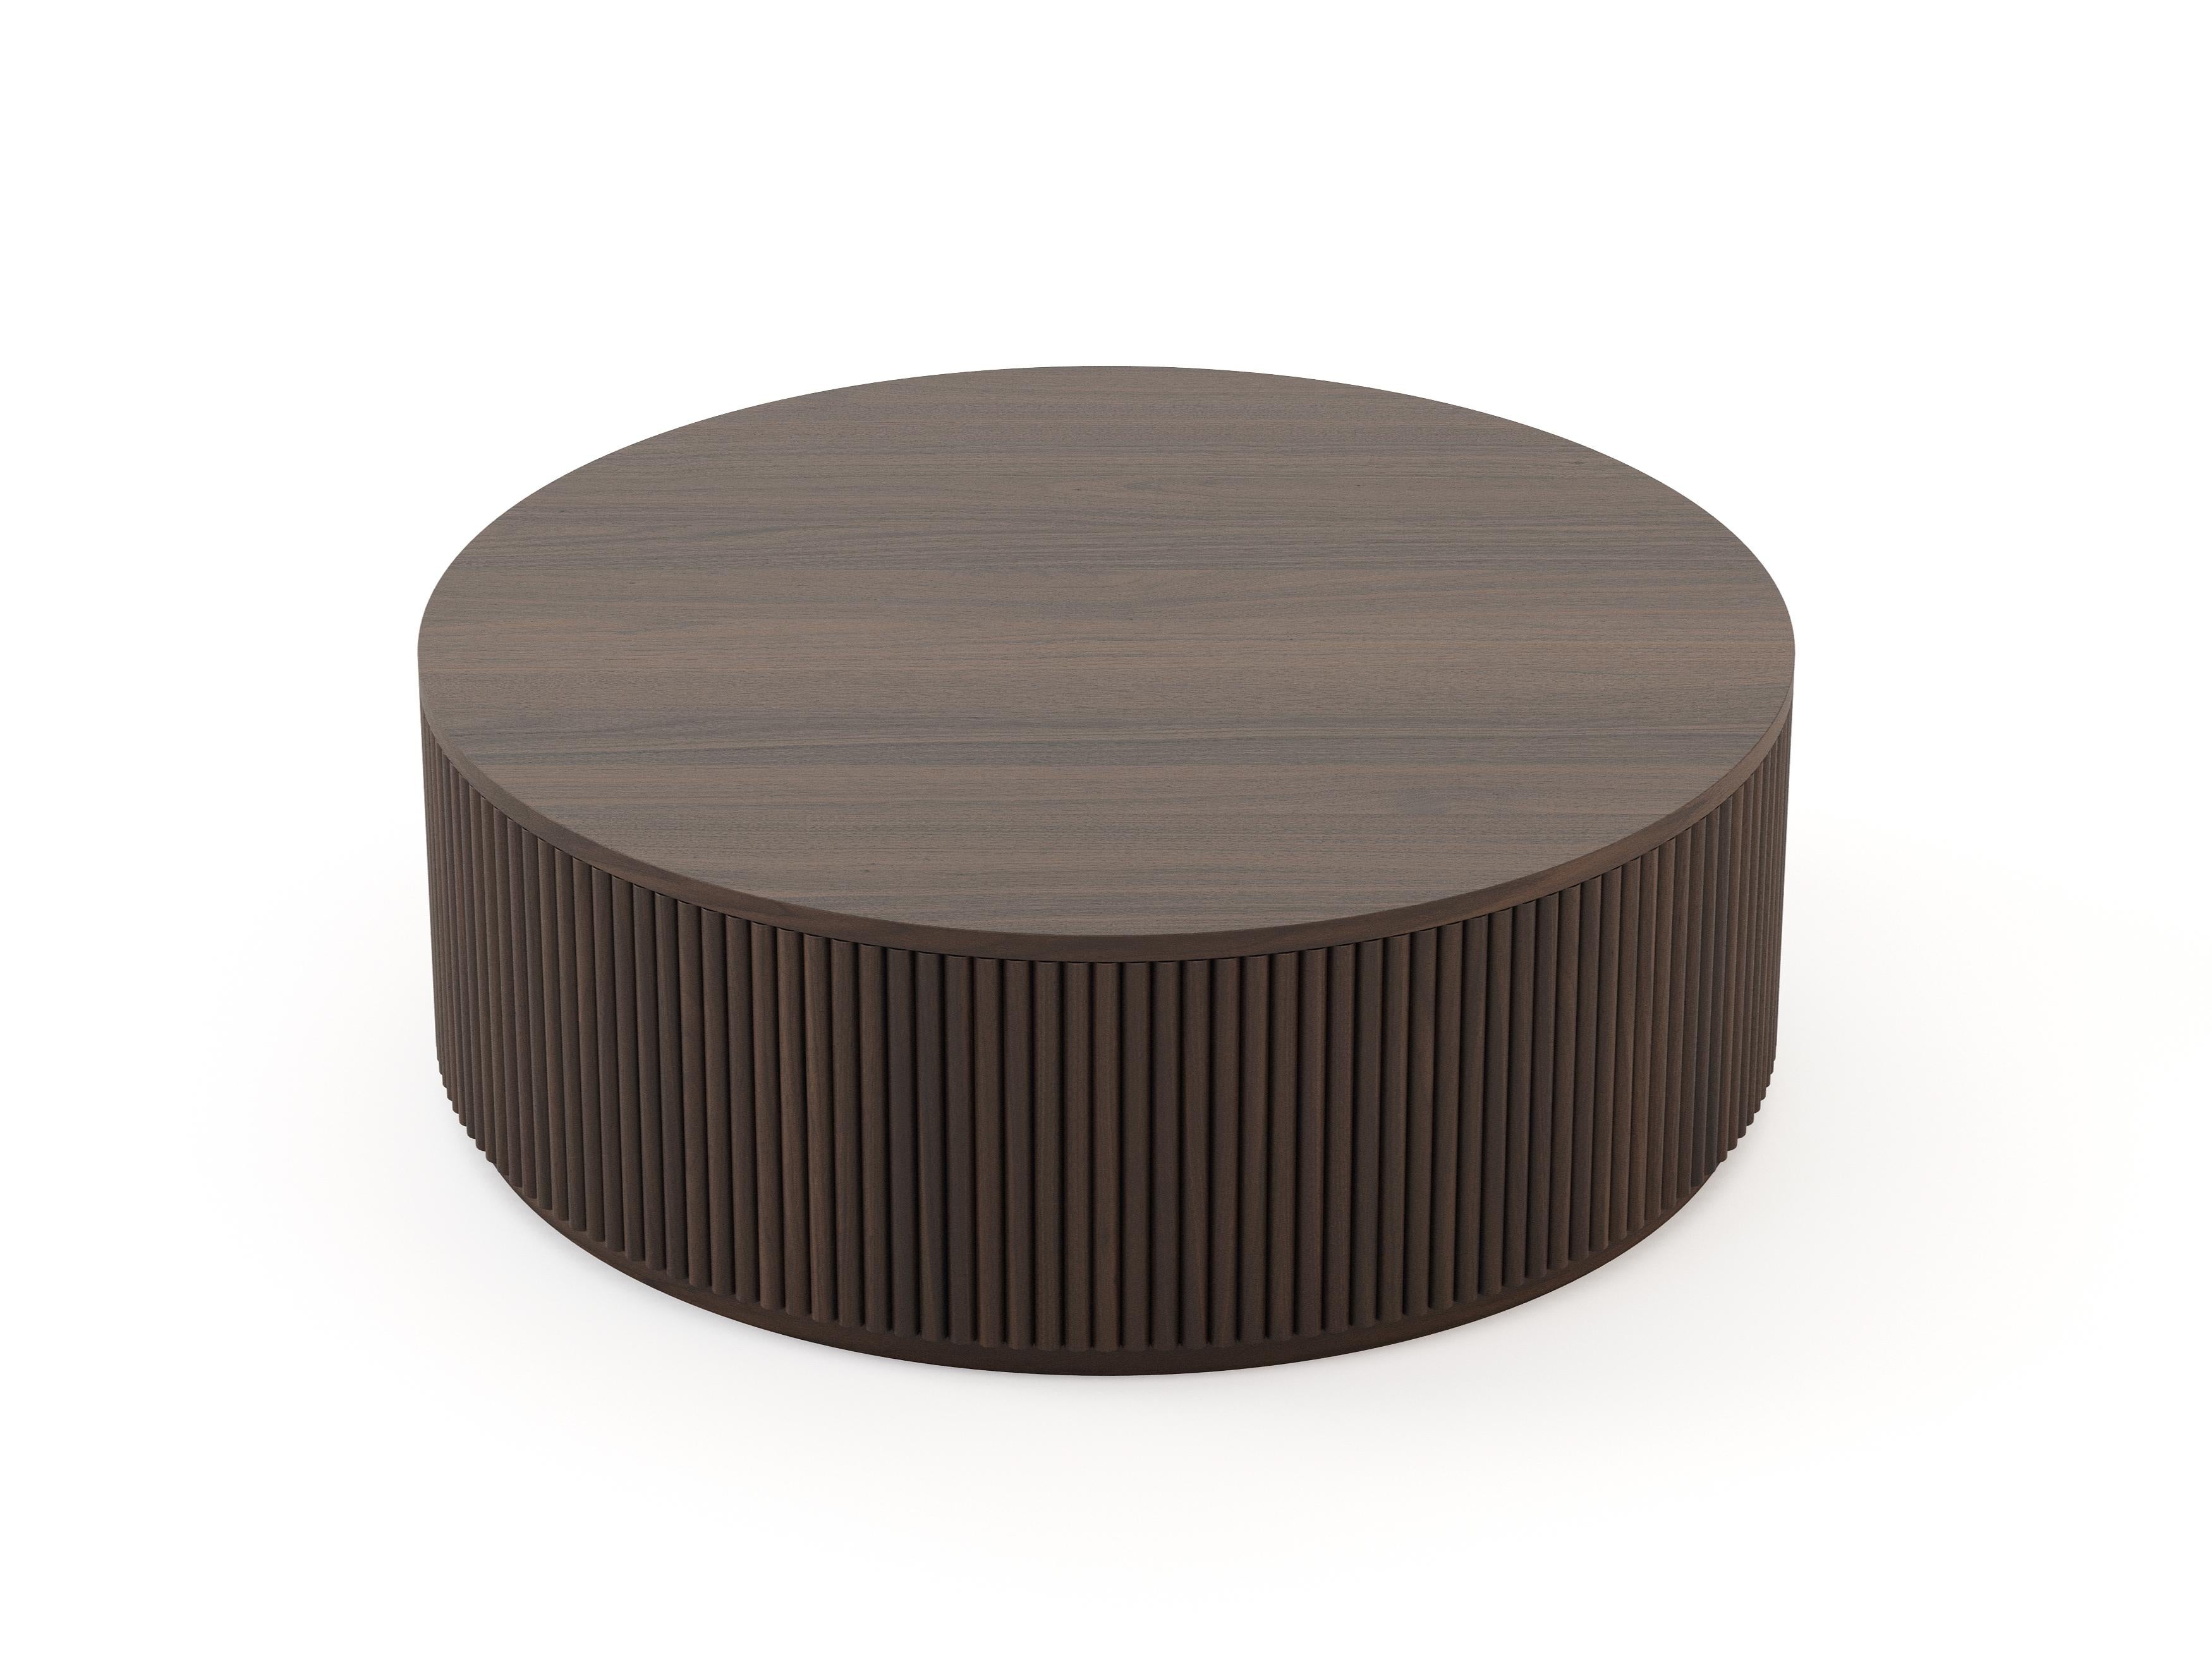 A design concept that combines the rustic beauty of corrugated wood with the sleek elegance of copper. At the heart of this collection is the copper coffee table - a piece that will add warmth and character to any Nordic or minimalist